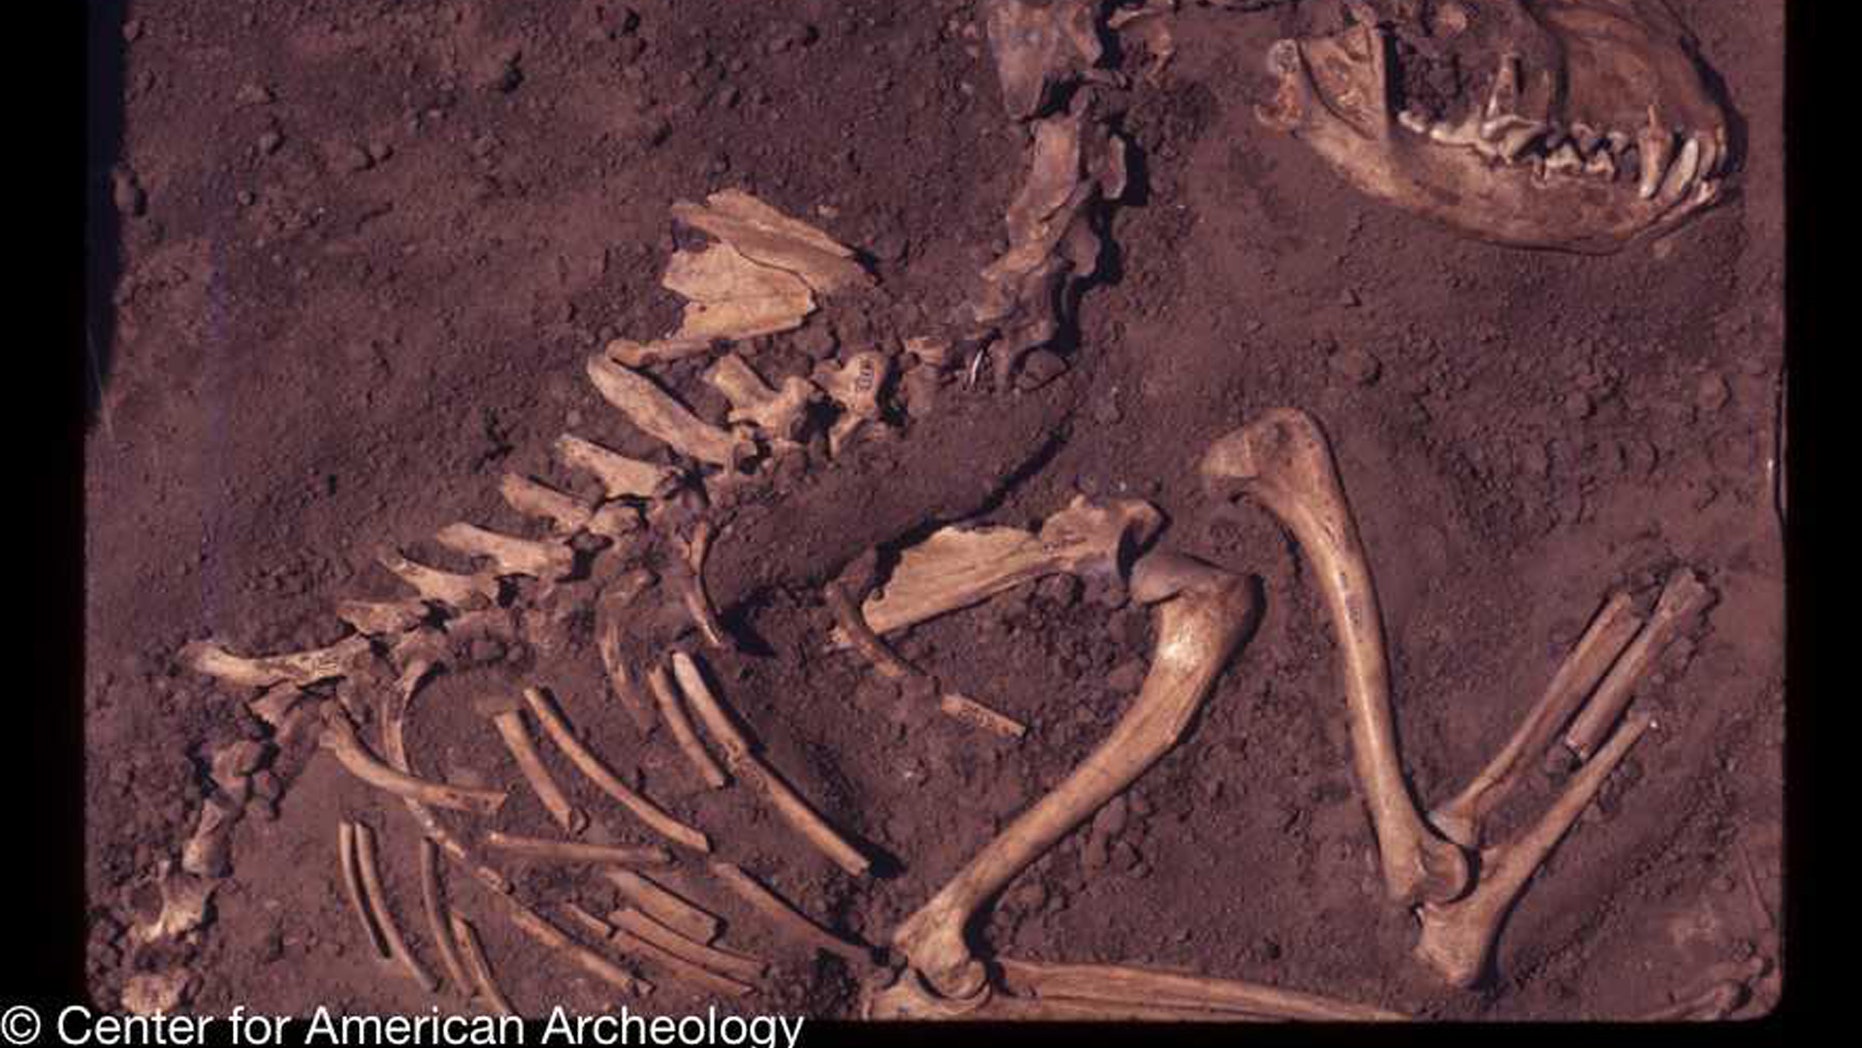 Dogs were domesticated in North America 10,000 years ago, study says